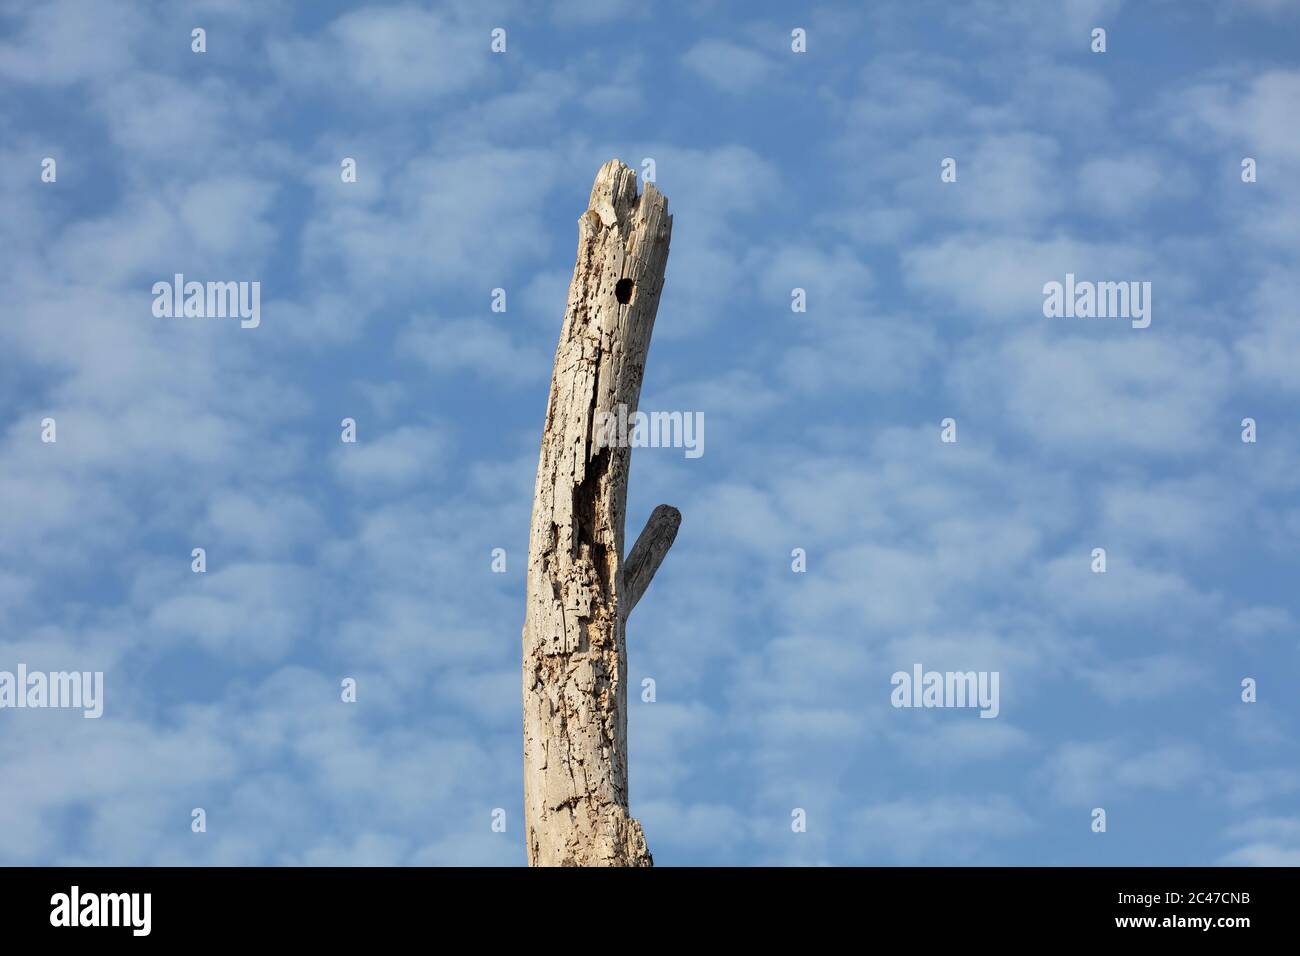 Dead tree branch with blue sky for background Stock Photo